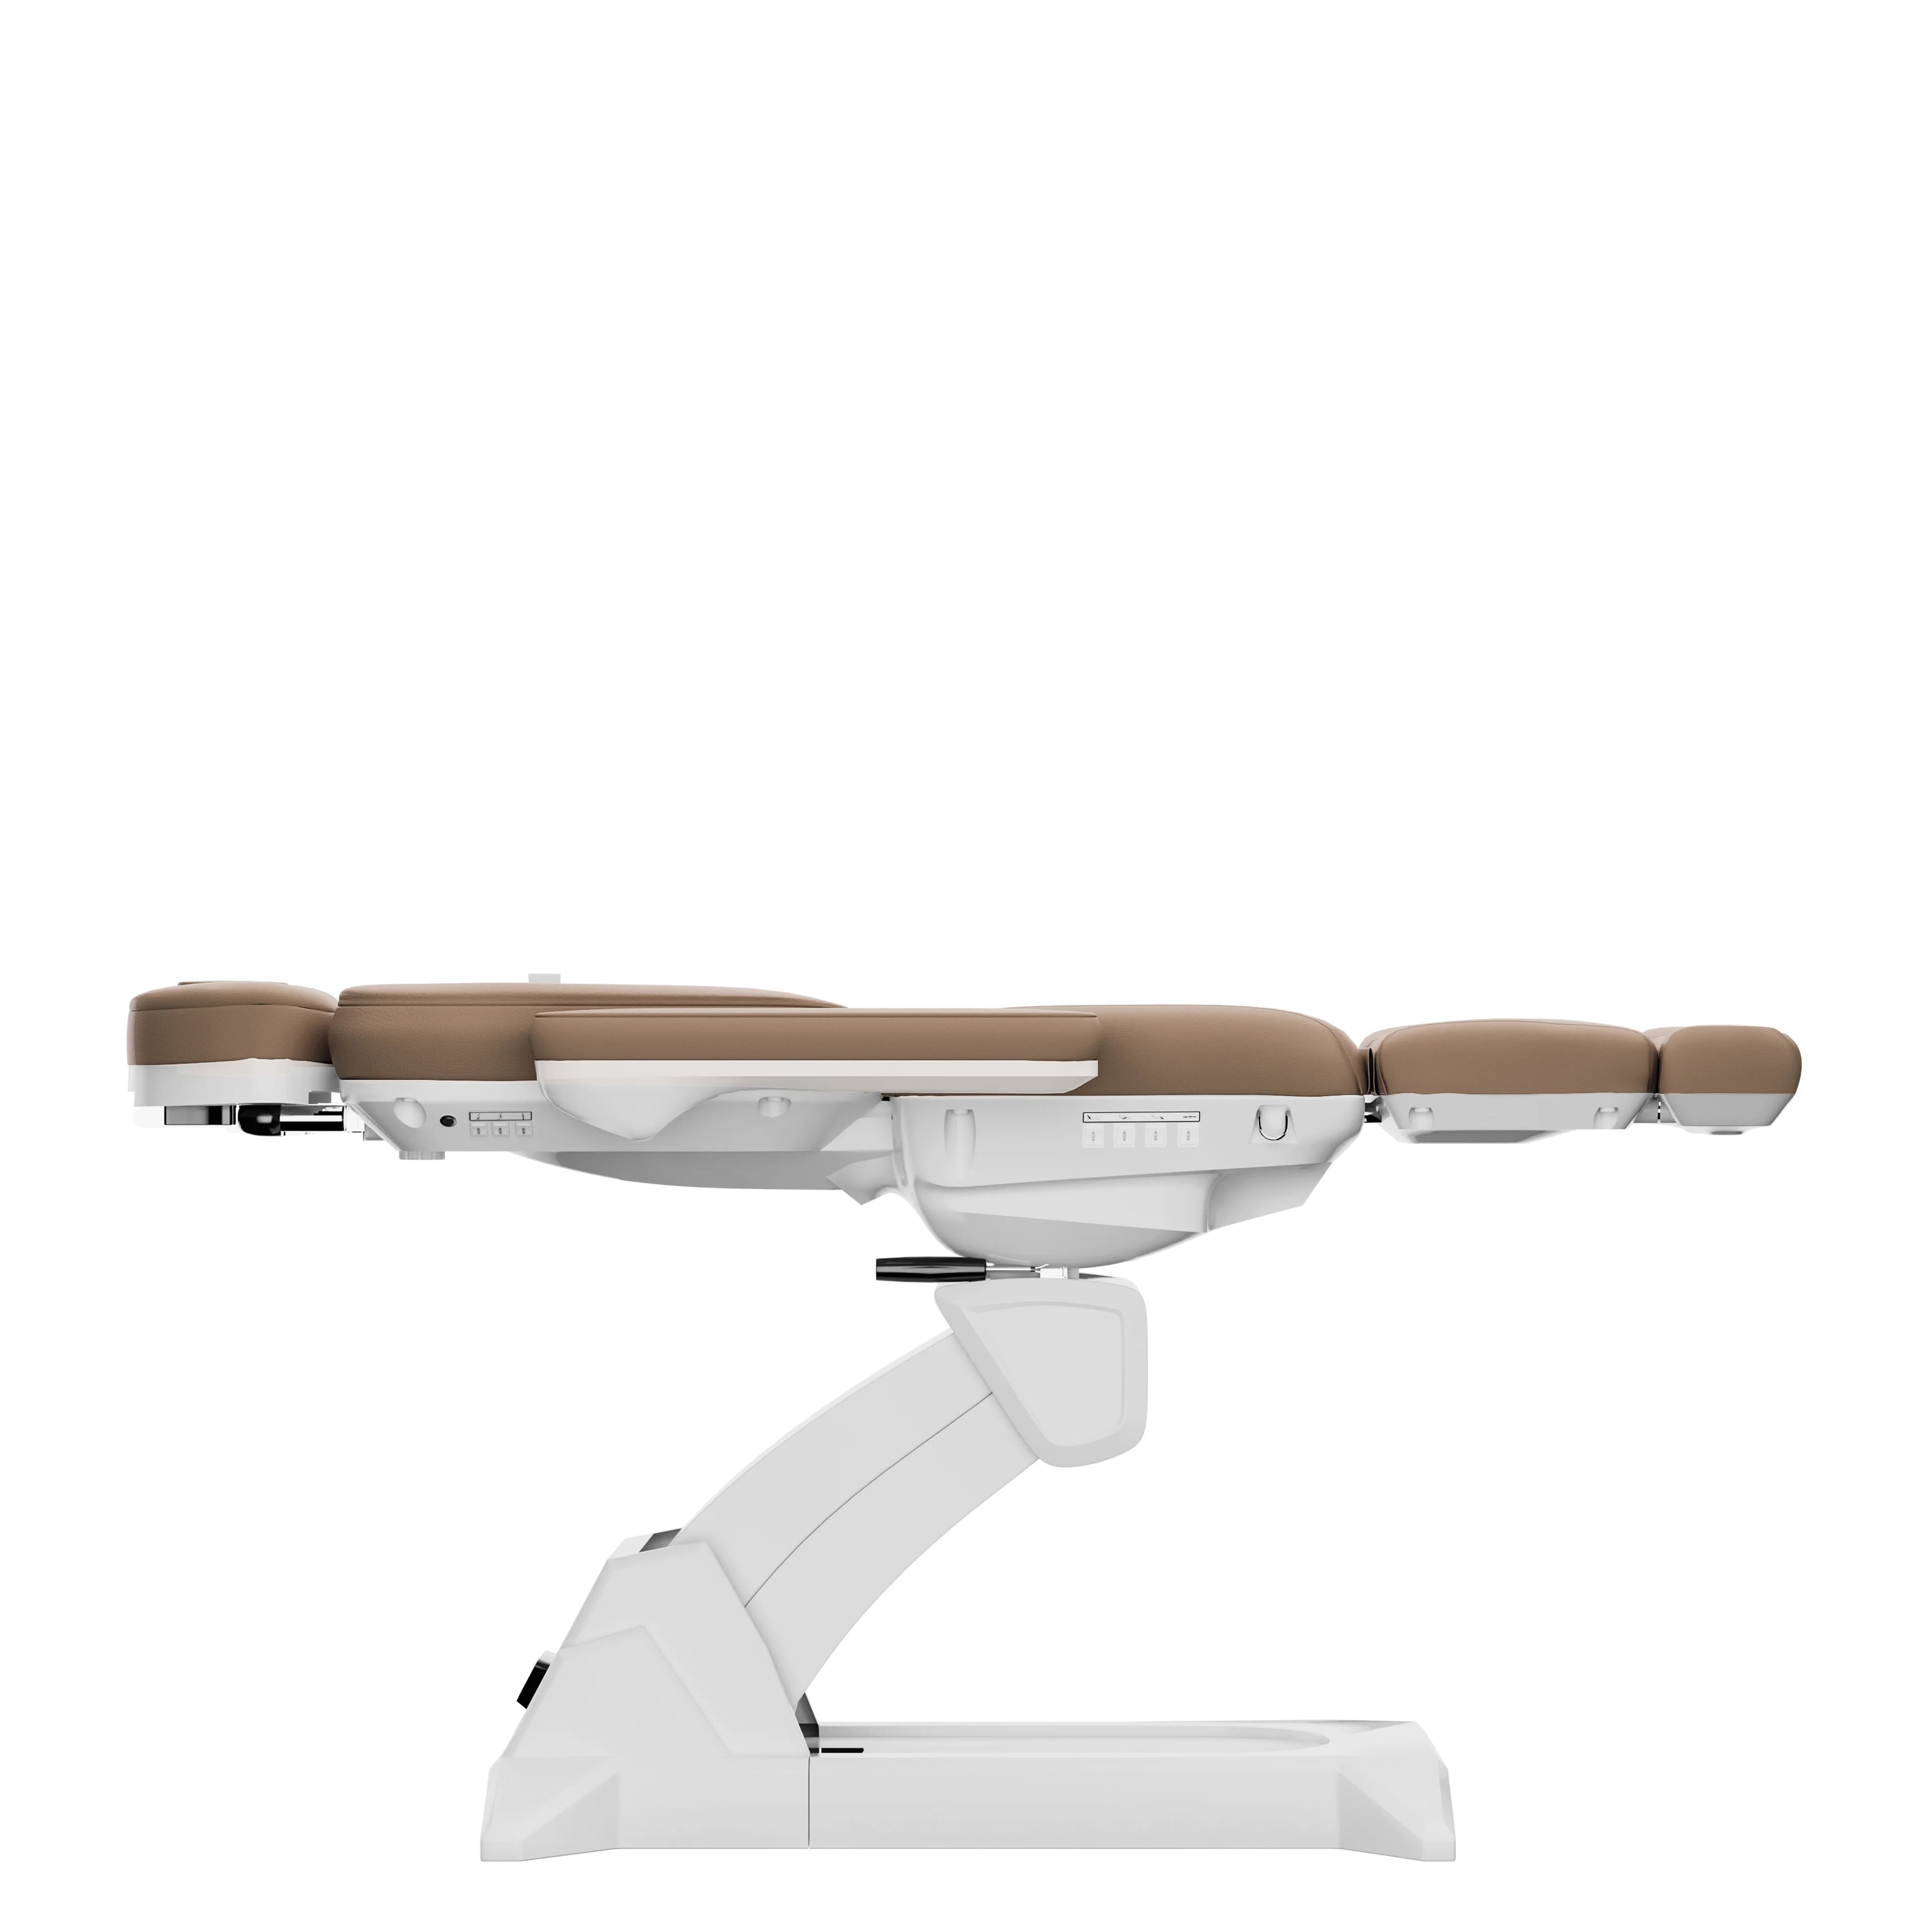 SpaMarc . Ultera (Brown) . Rotating . 4 Motor Spa Treatment Chair/Bed